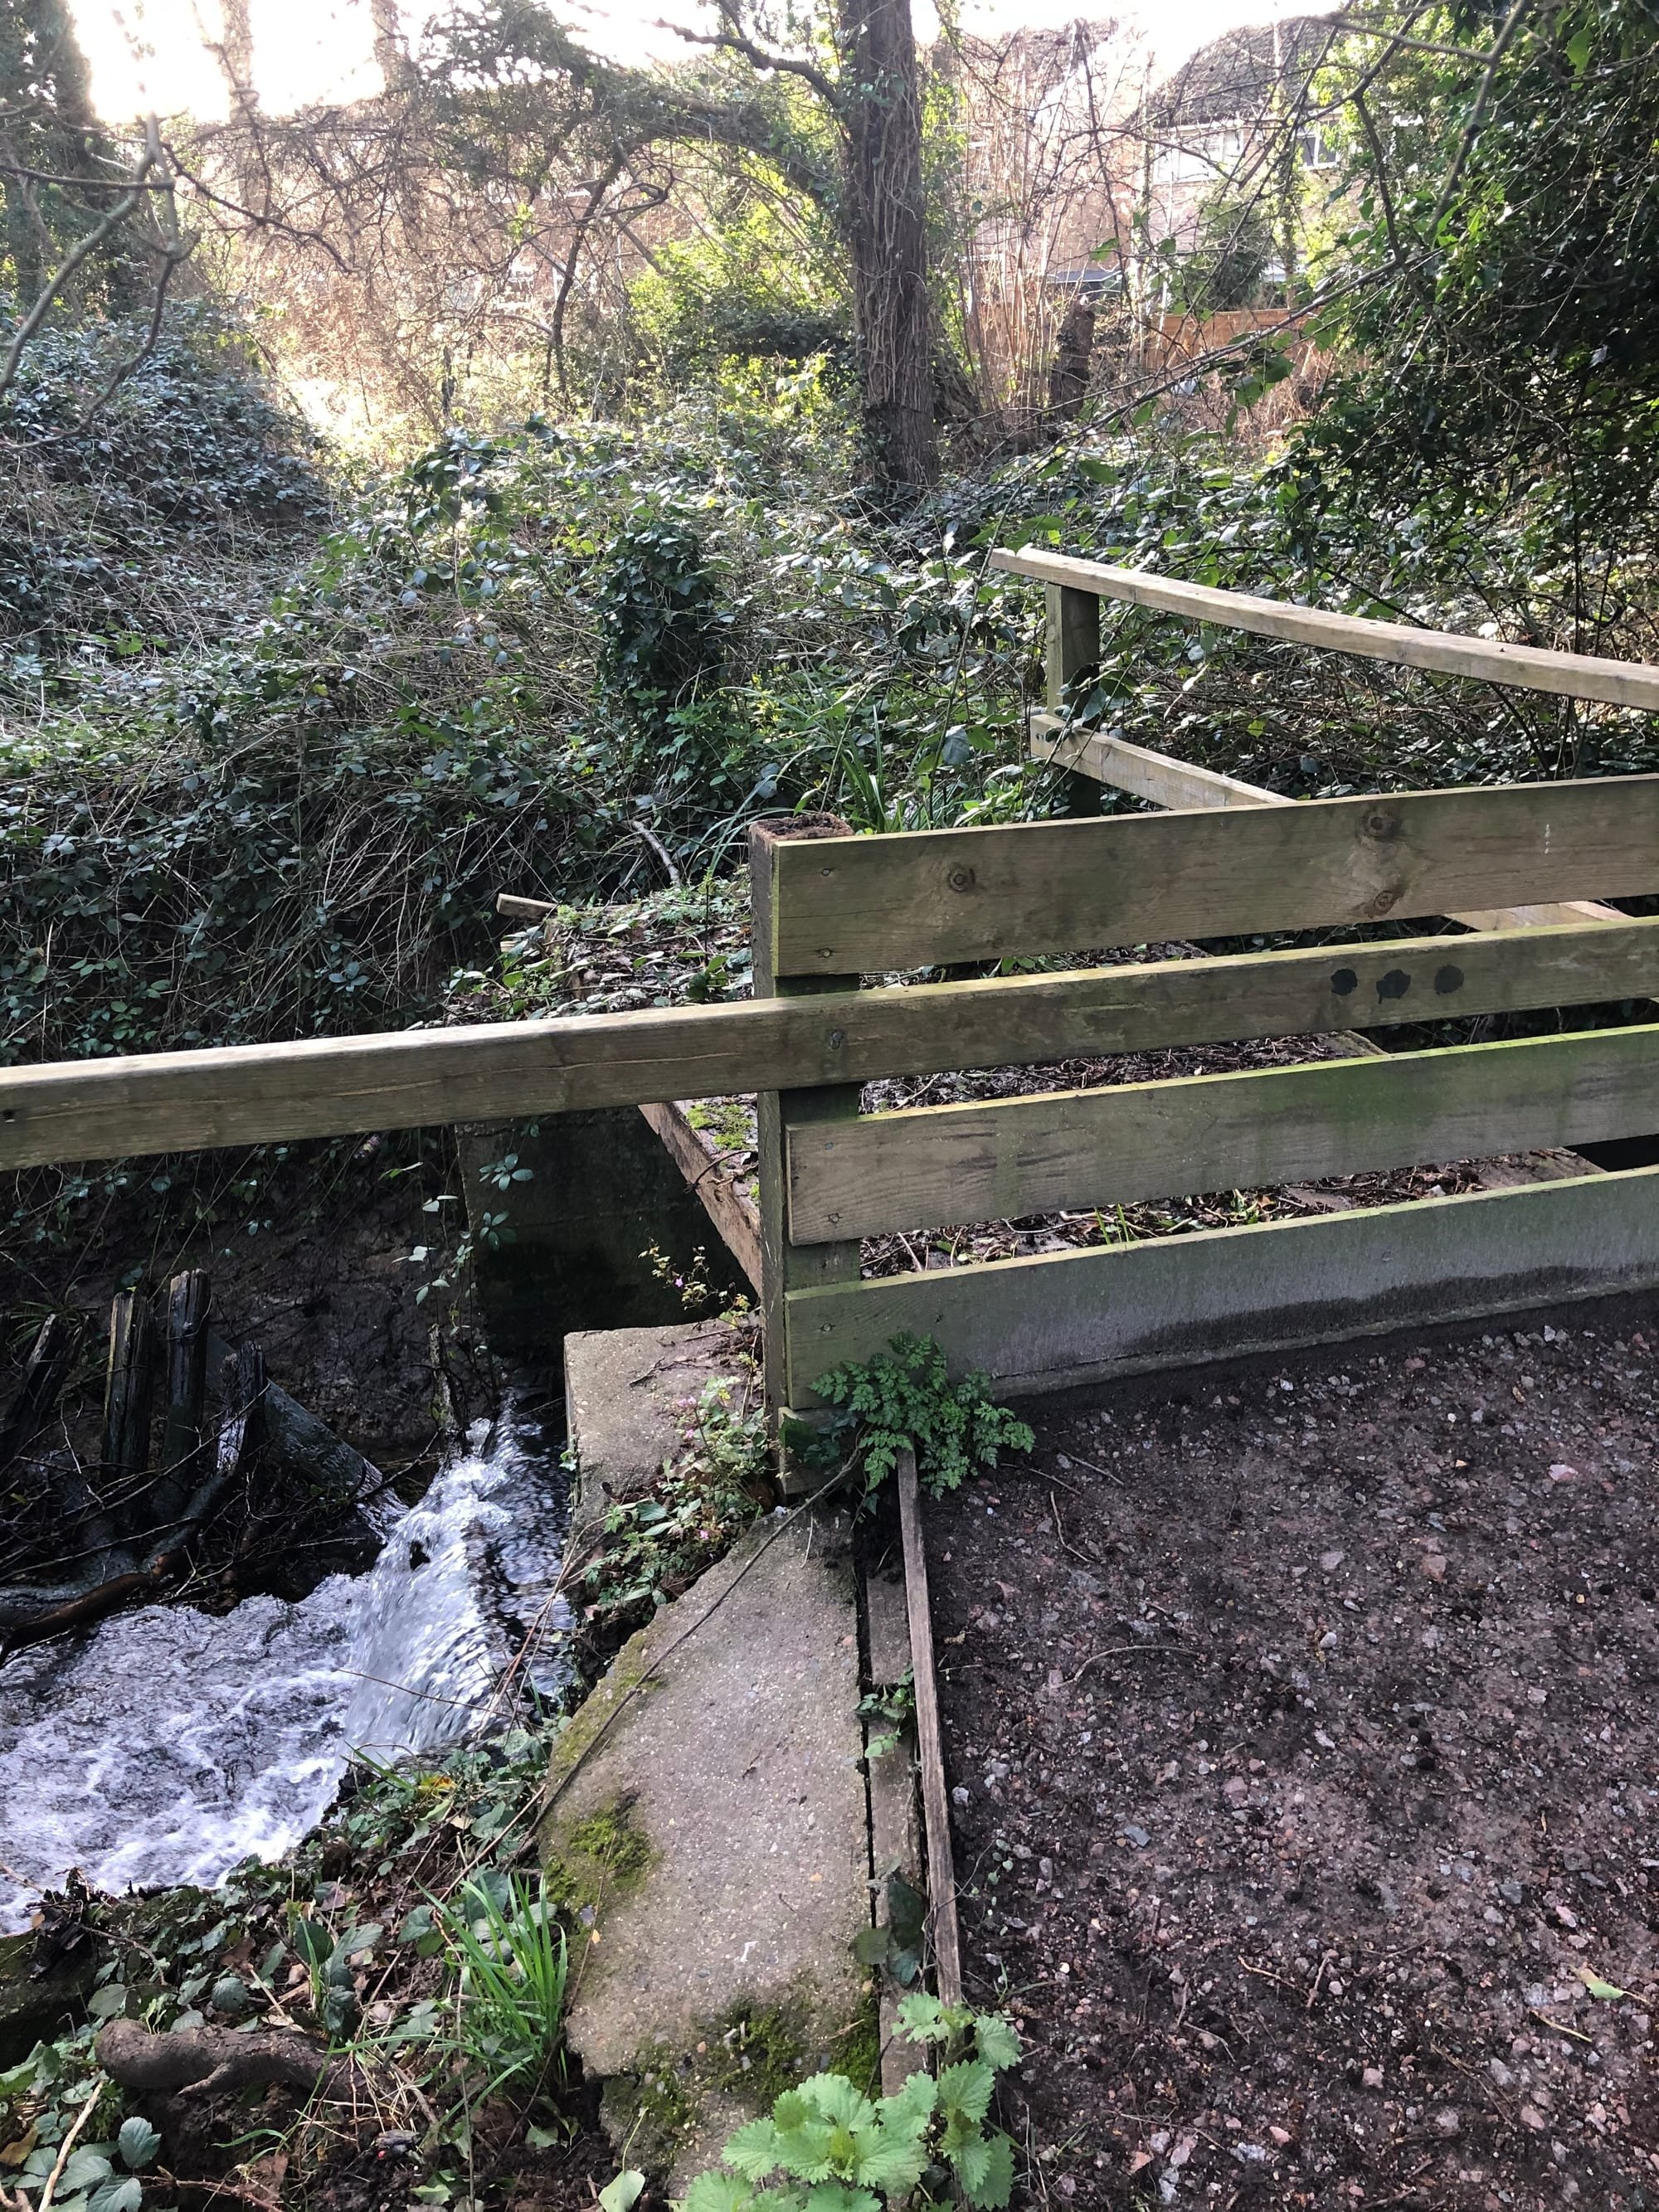 The footbridge to Gumping Common which people want replaced to ease access